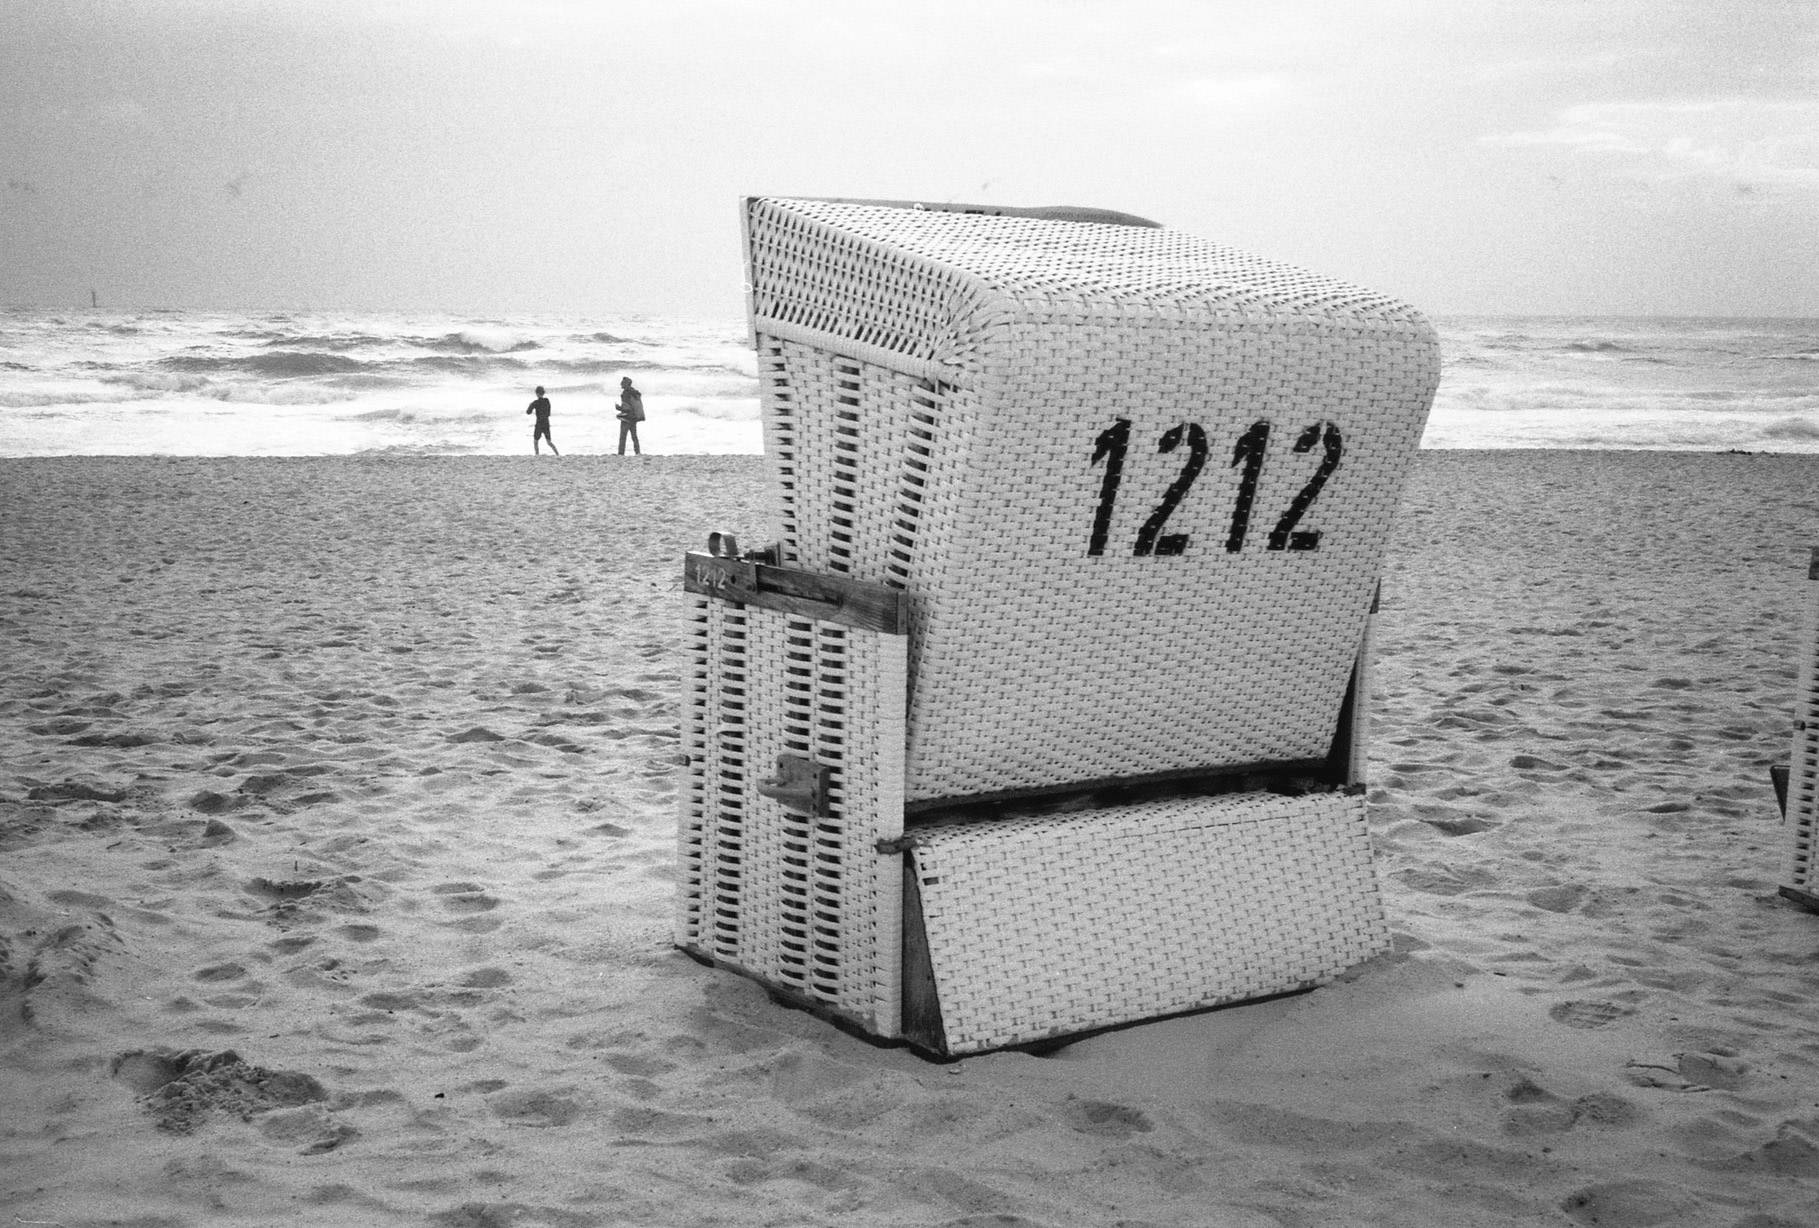 a beach basket chair numbered 1212 seen from behind, two people walking by the sea seen on the background